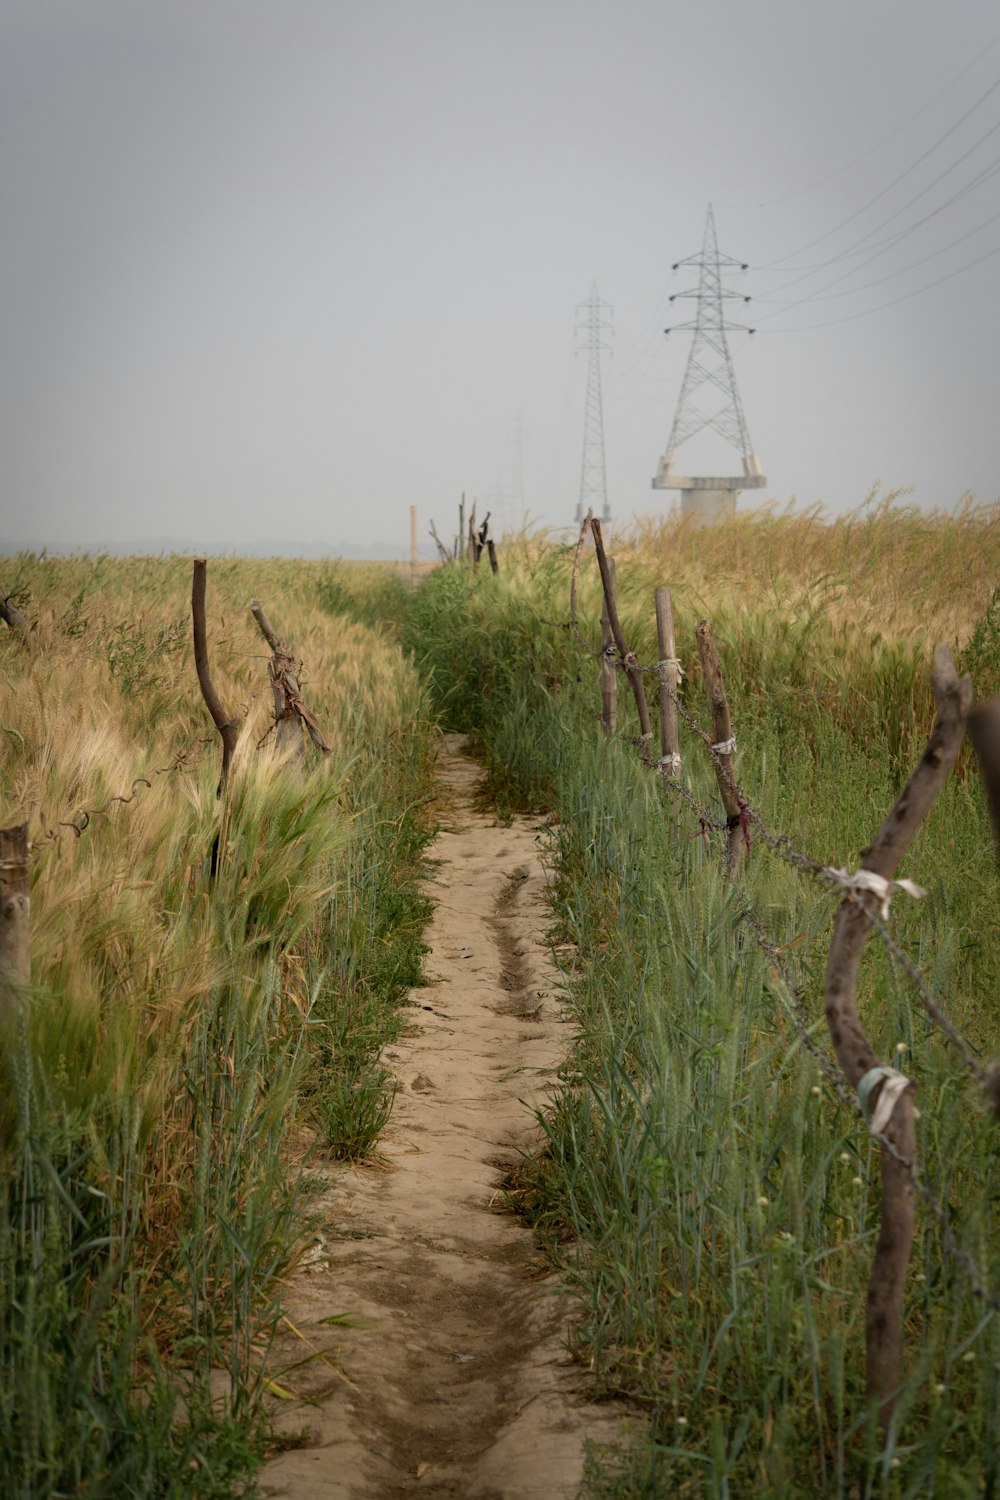 a dirt path in a field with power lines in the background